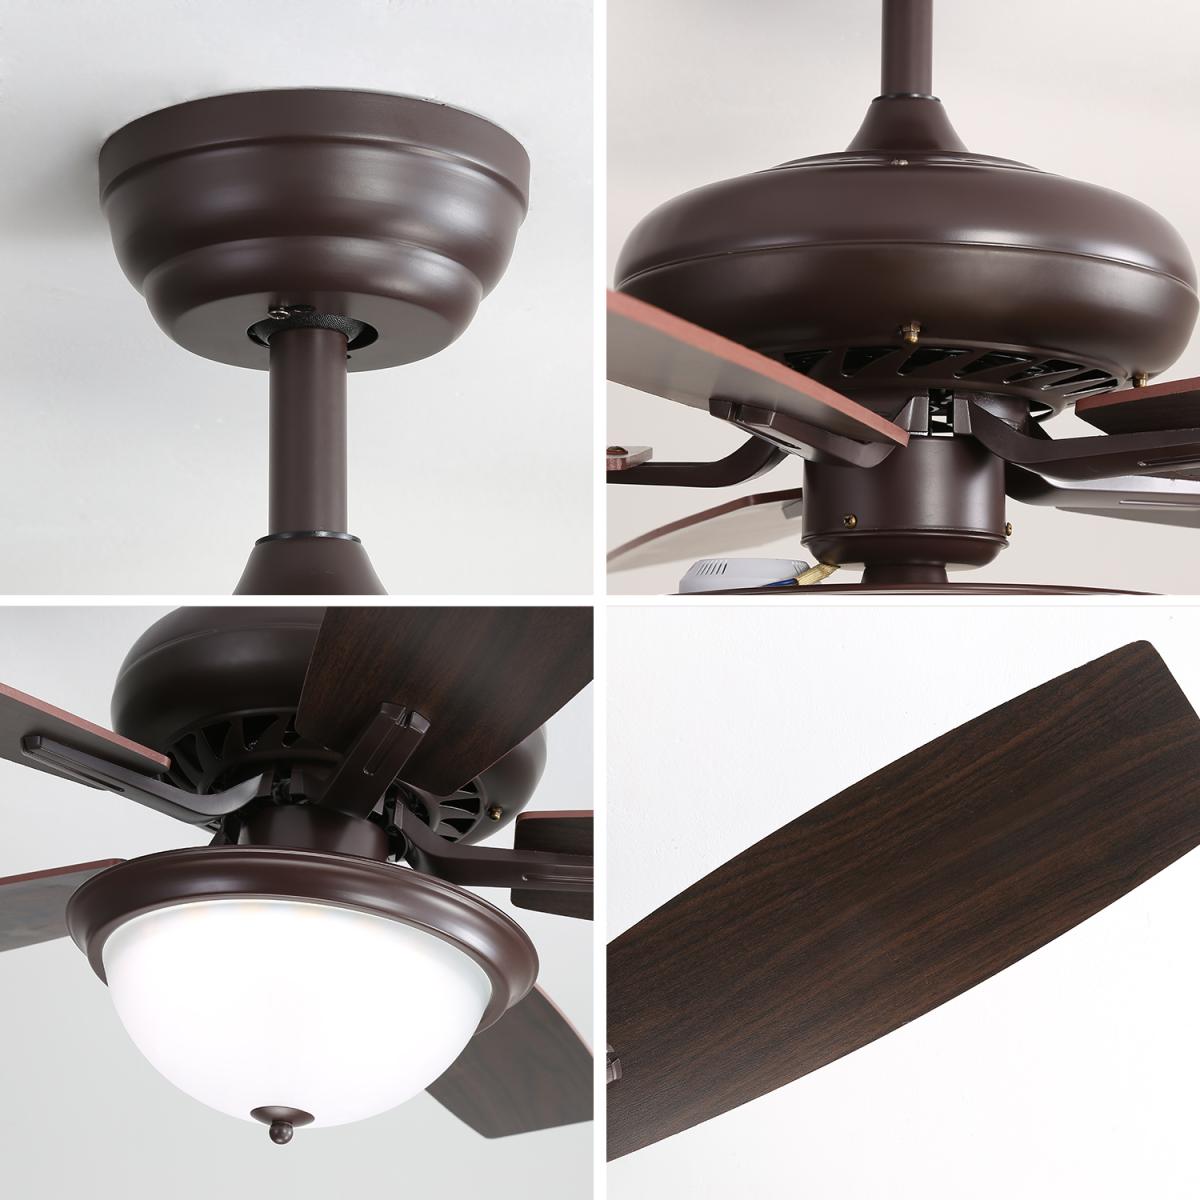 52 Inch Indoor Crystal Ceiling Fan With 3 Speed Wind 5 Plywood Blades Remote Control Ac Motor With Light